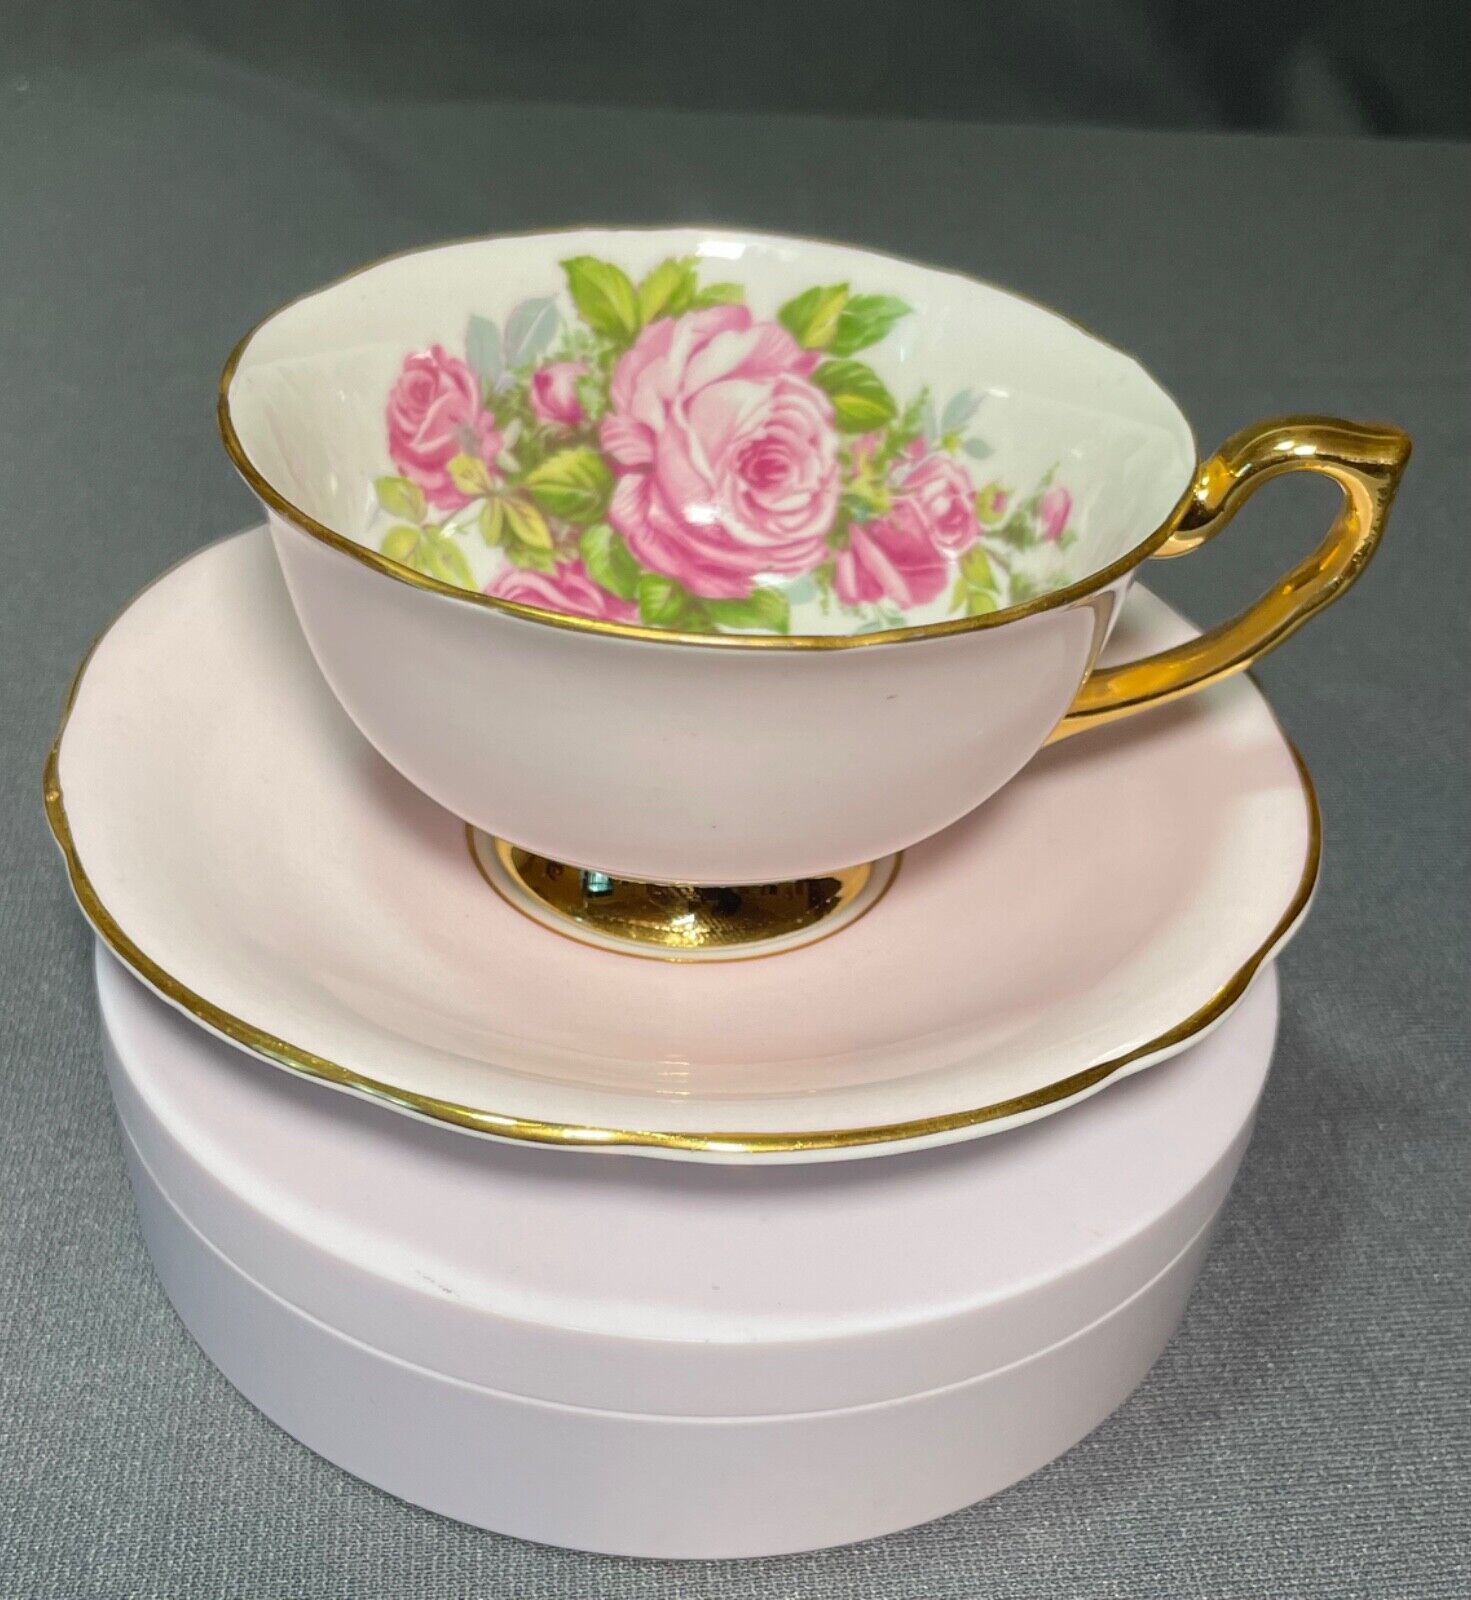 Vintage Windsor China footed Cup & Saucer Gold Trim Pink White w/ Roses England